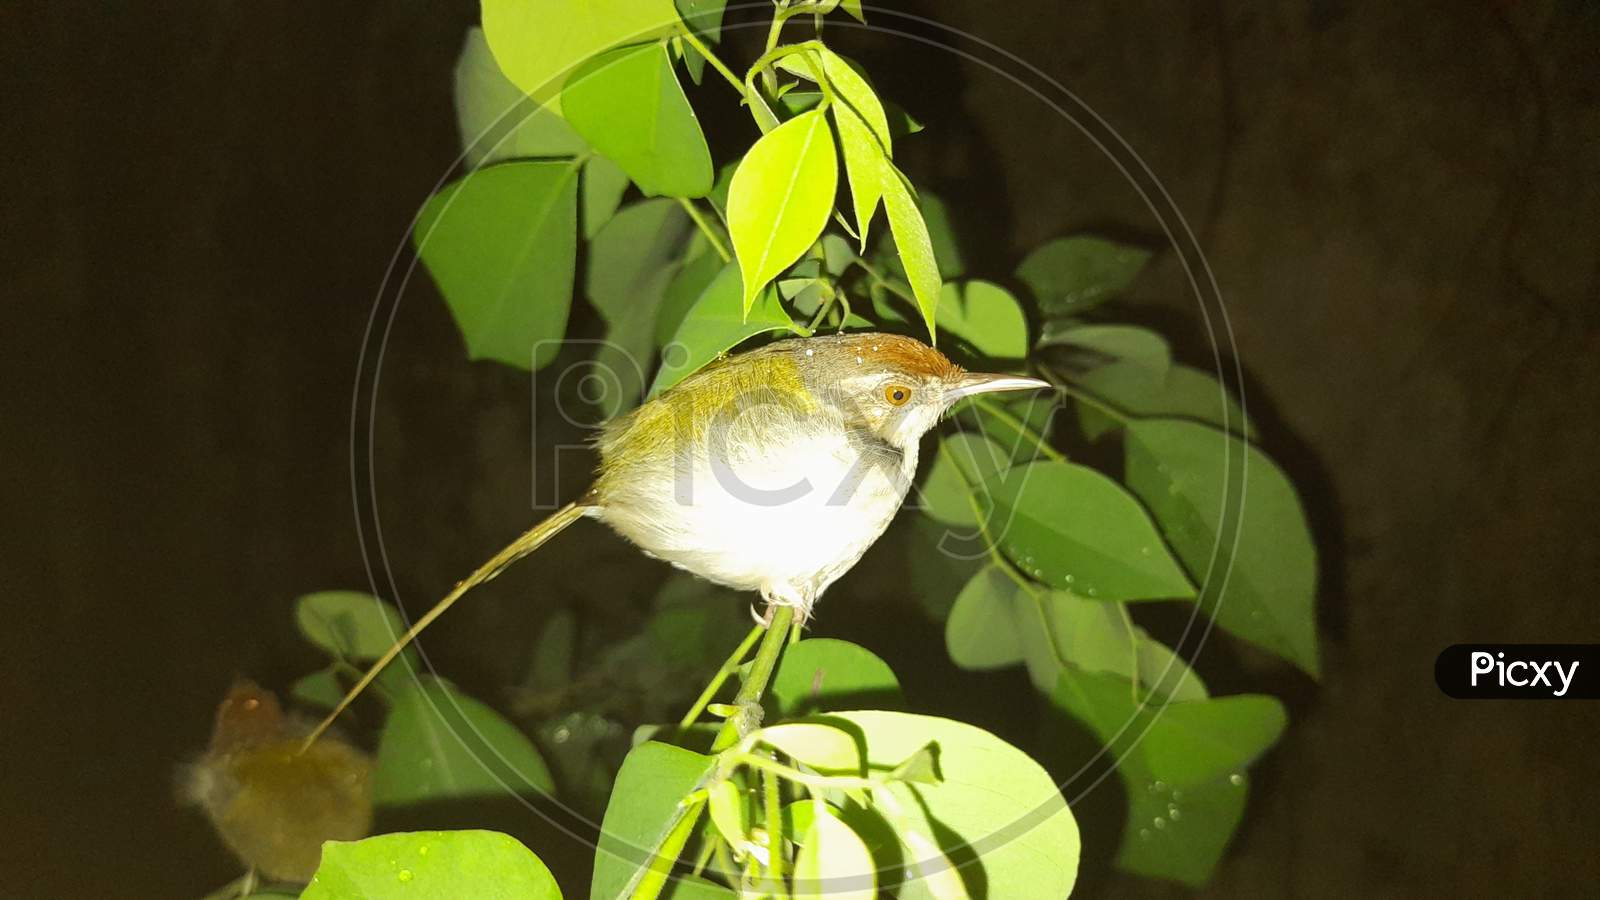 The common tailorbird (Orthotomus sutorius) is a songbird found across tropical Asia